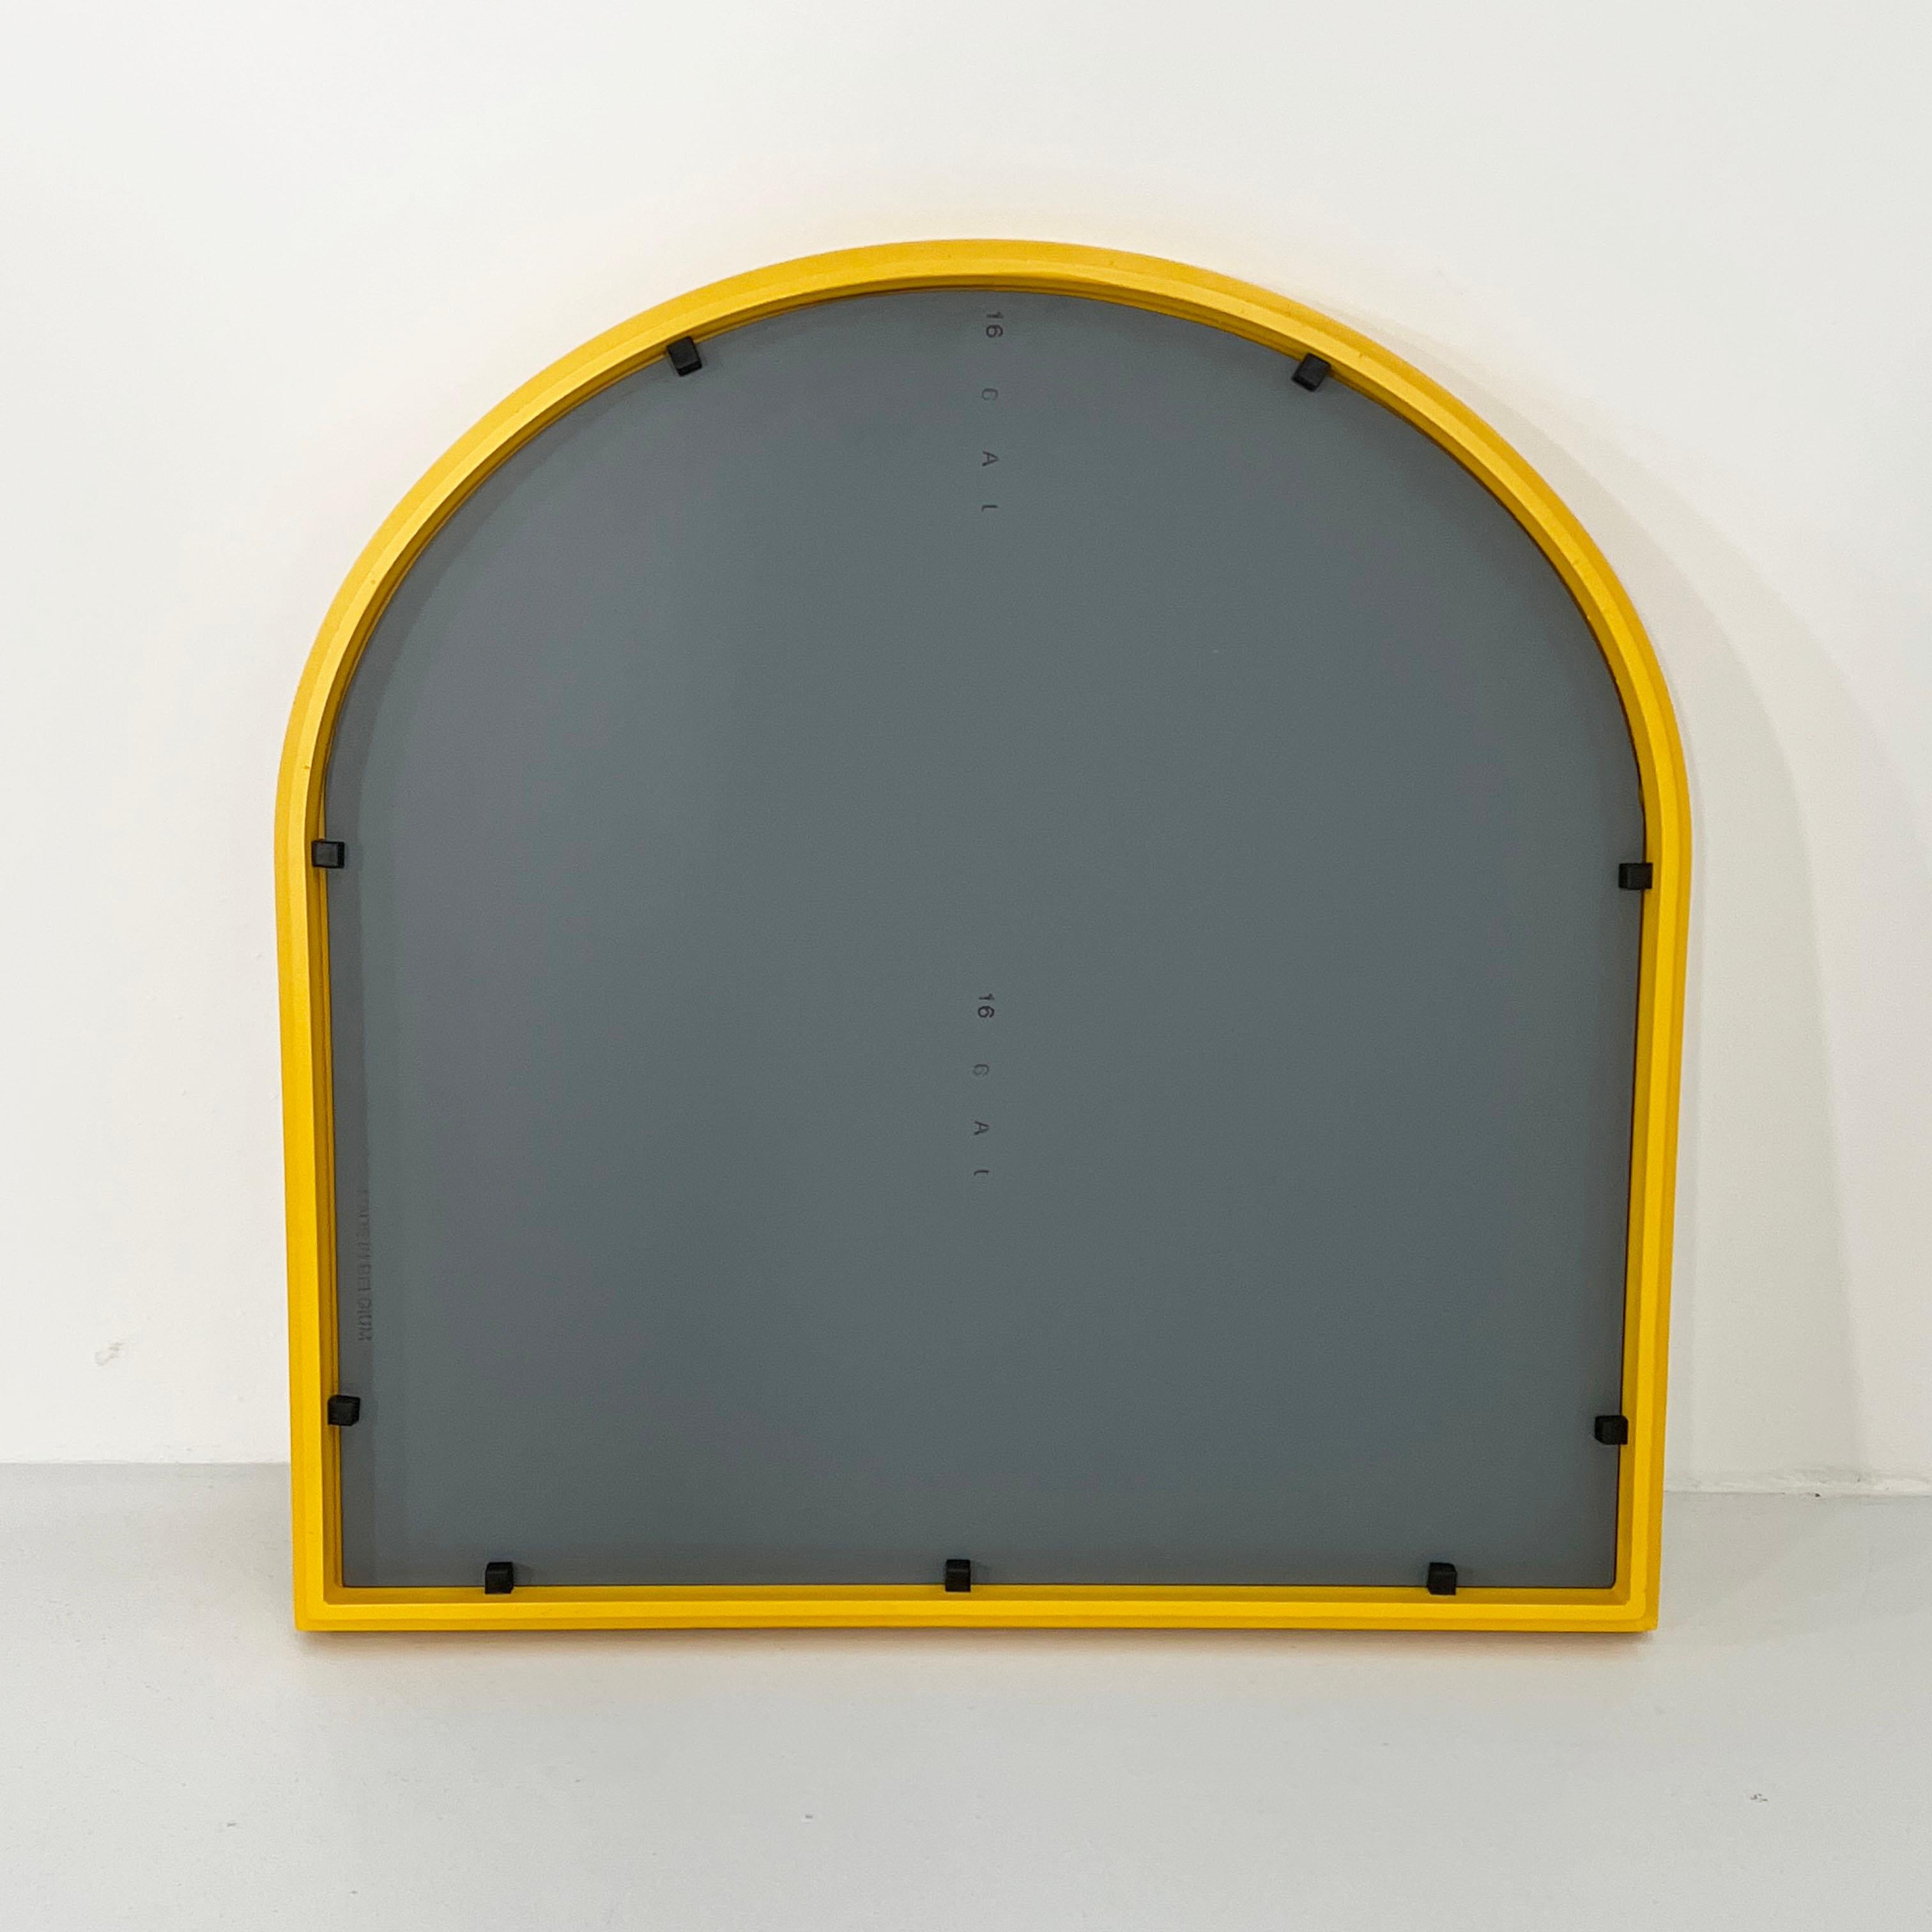 Late 20th Century Yellow Frame Mirror Model 4720 by Anna Castelli Ferrieri for Kartell, 1980s